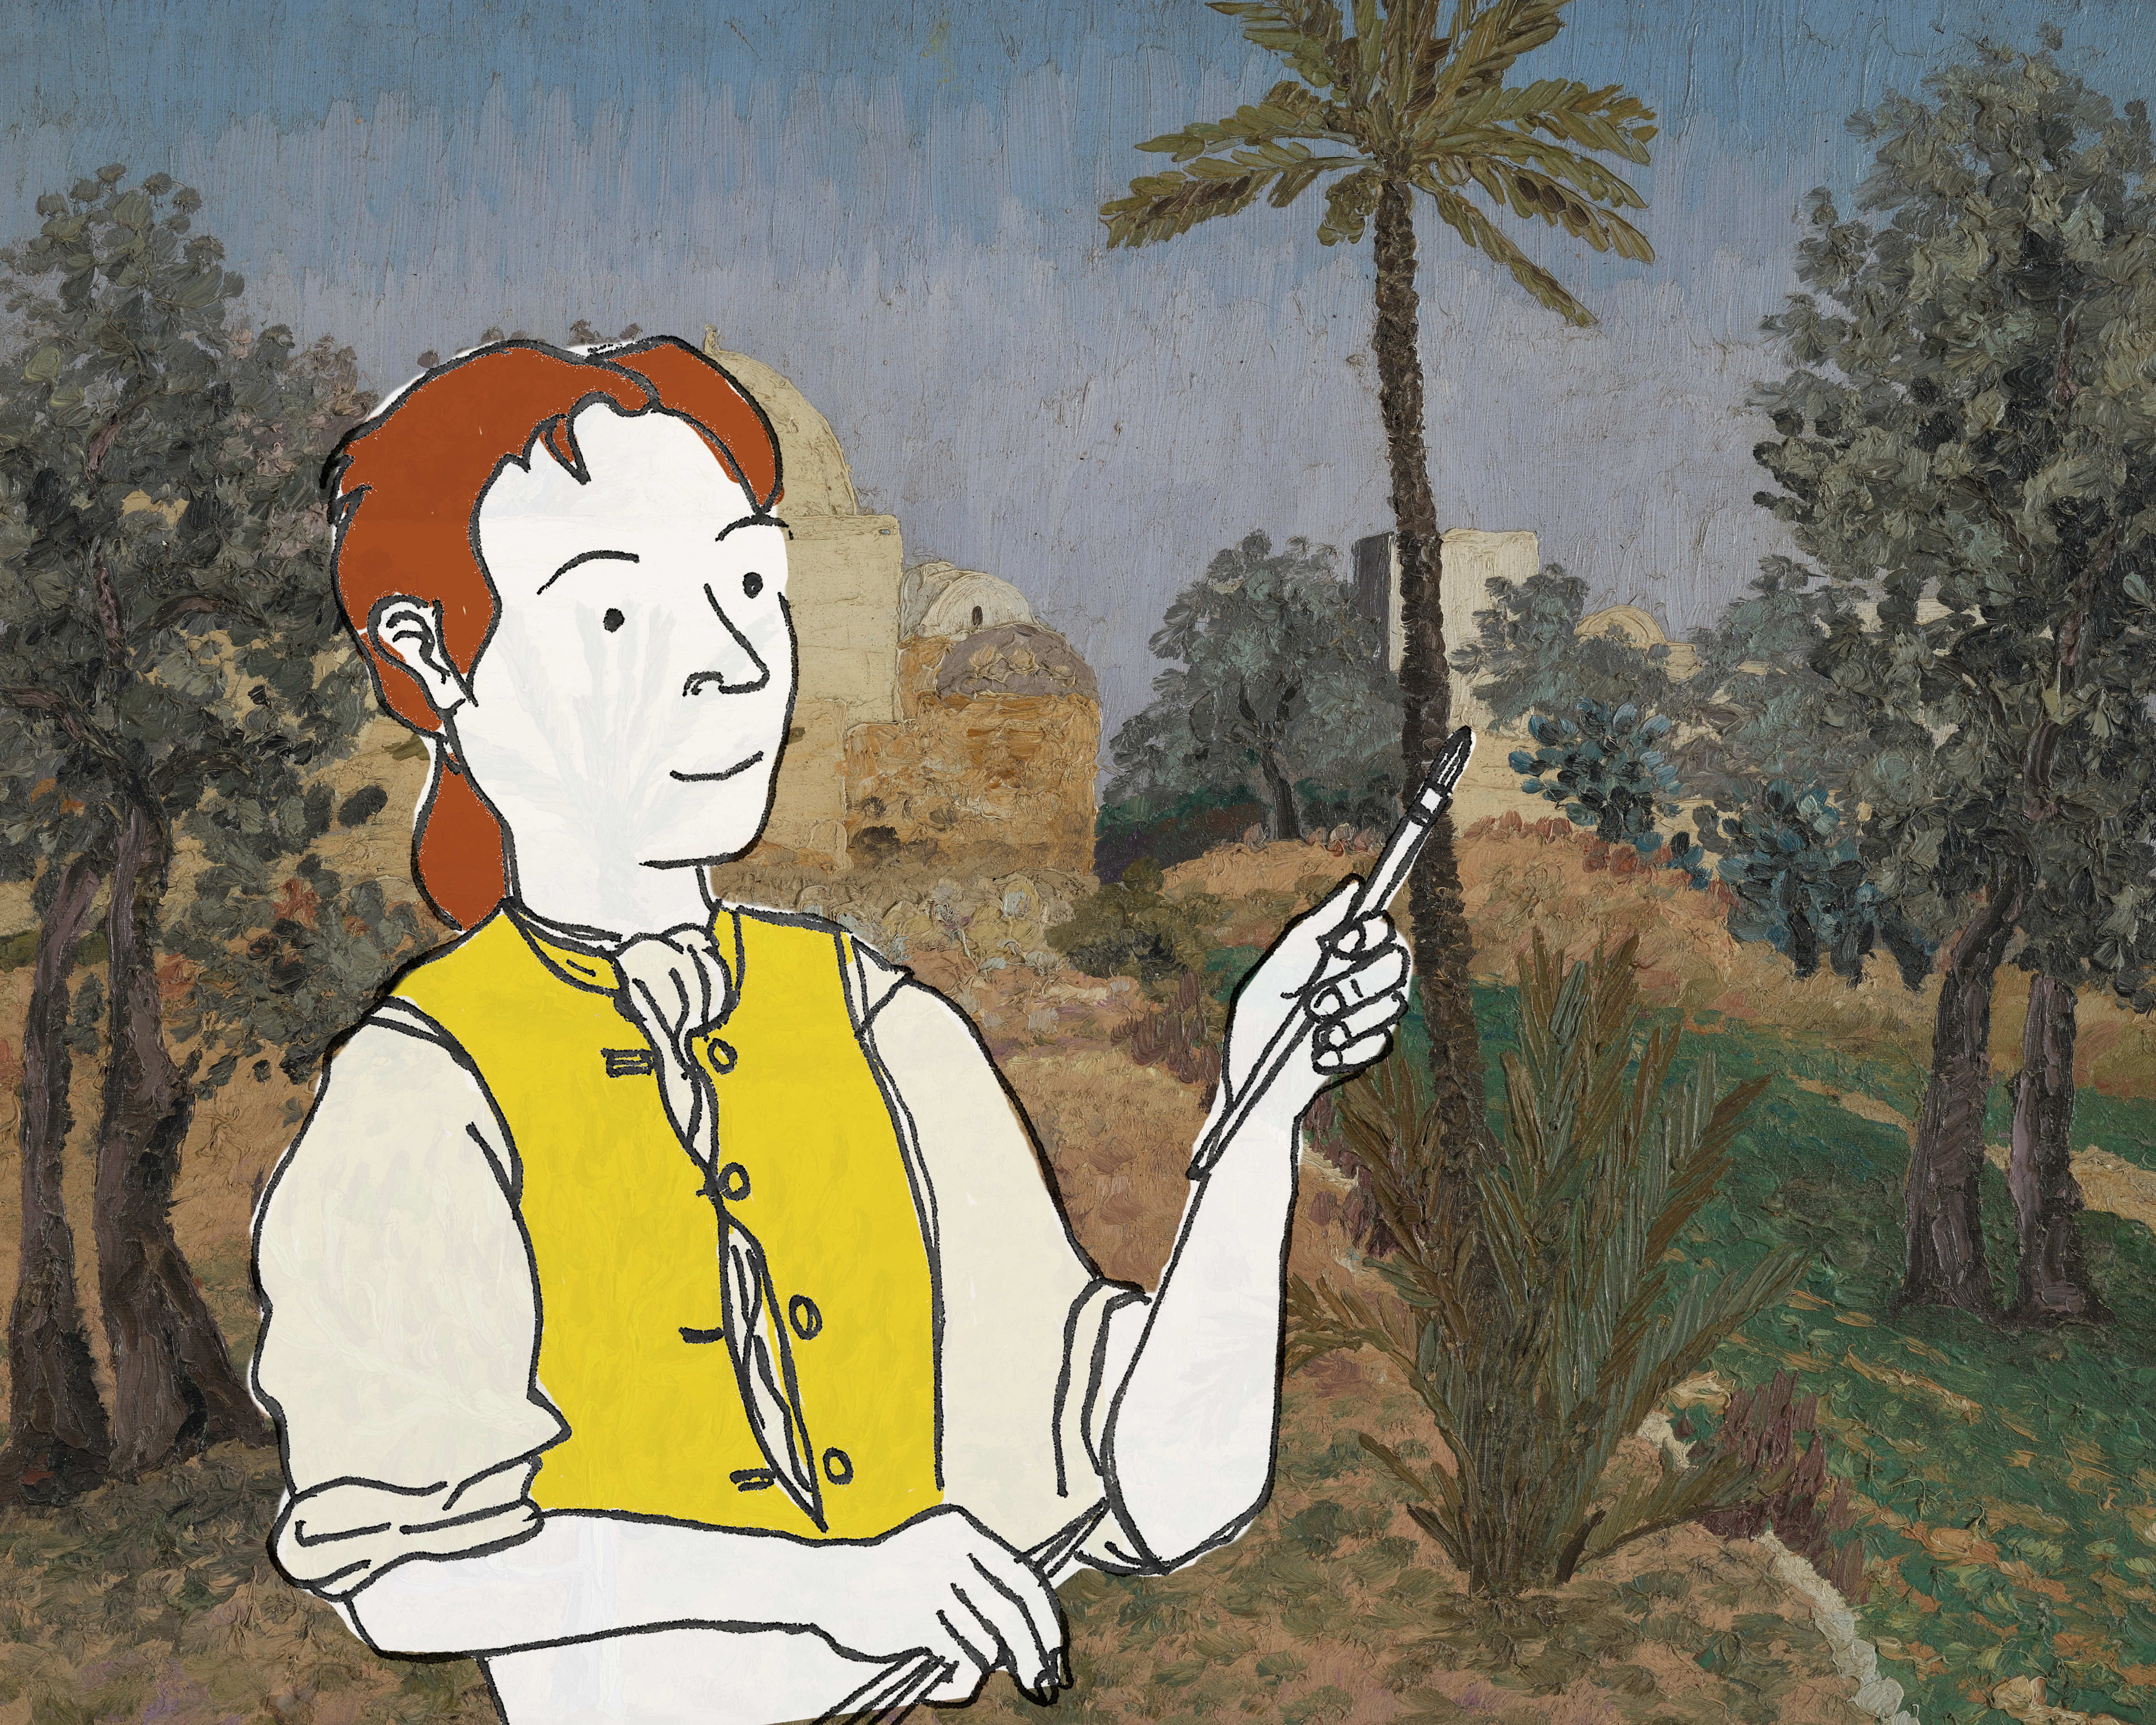 An image of the painting, Gardens in the Isle of Djerba by Cedric Morris. Overlayed is a character illustration of Thomas Gainsborough.